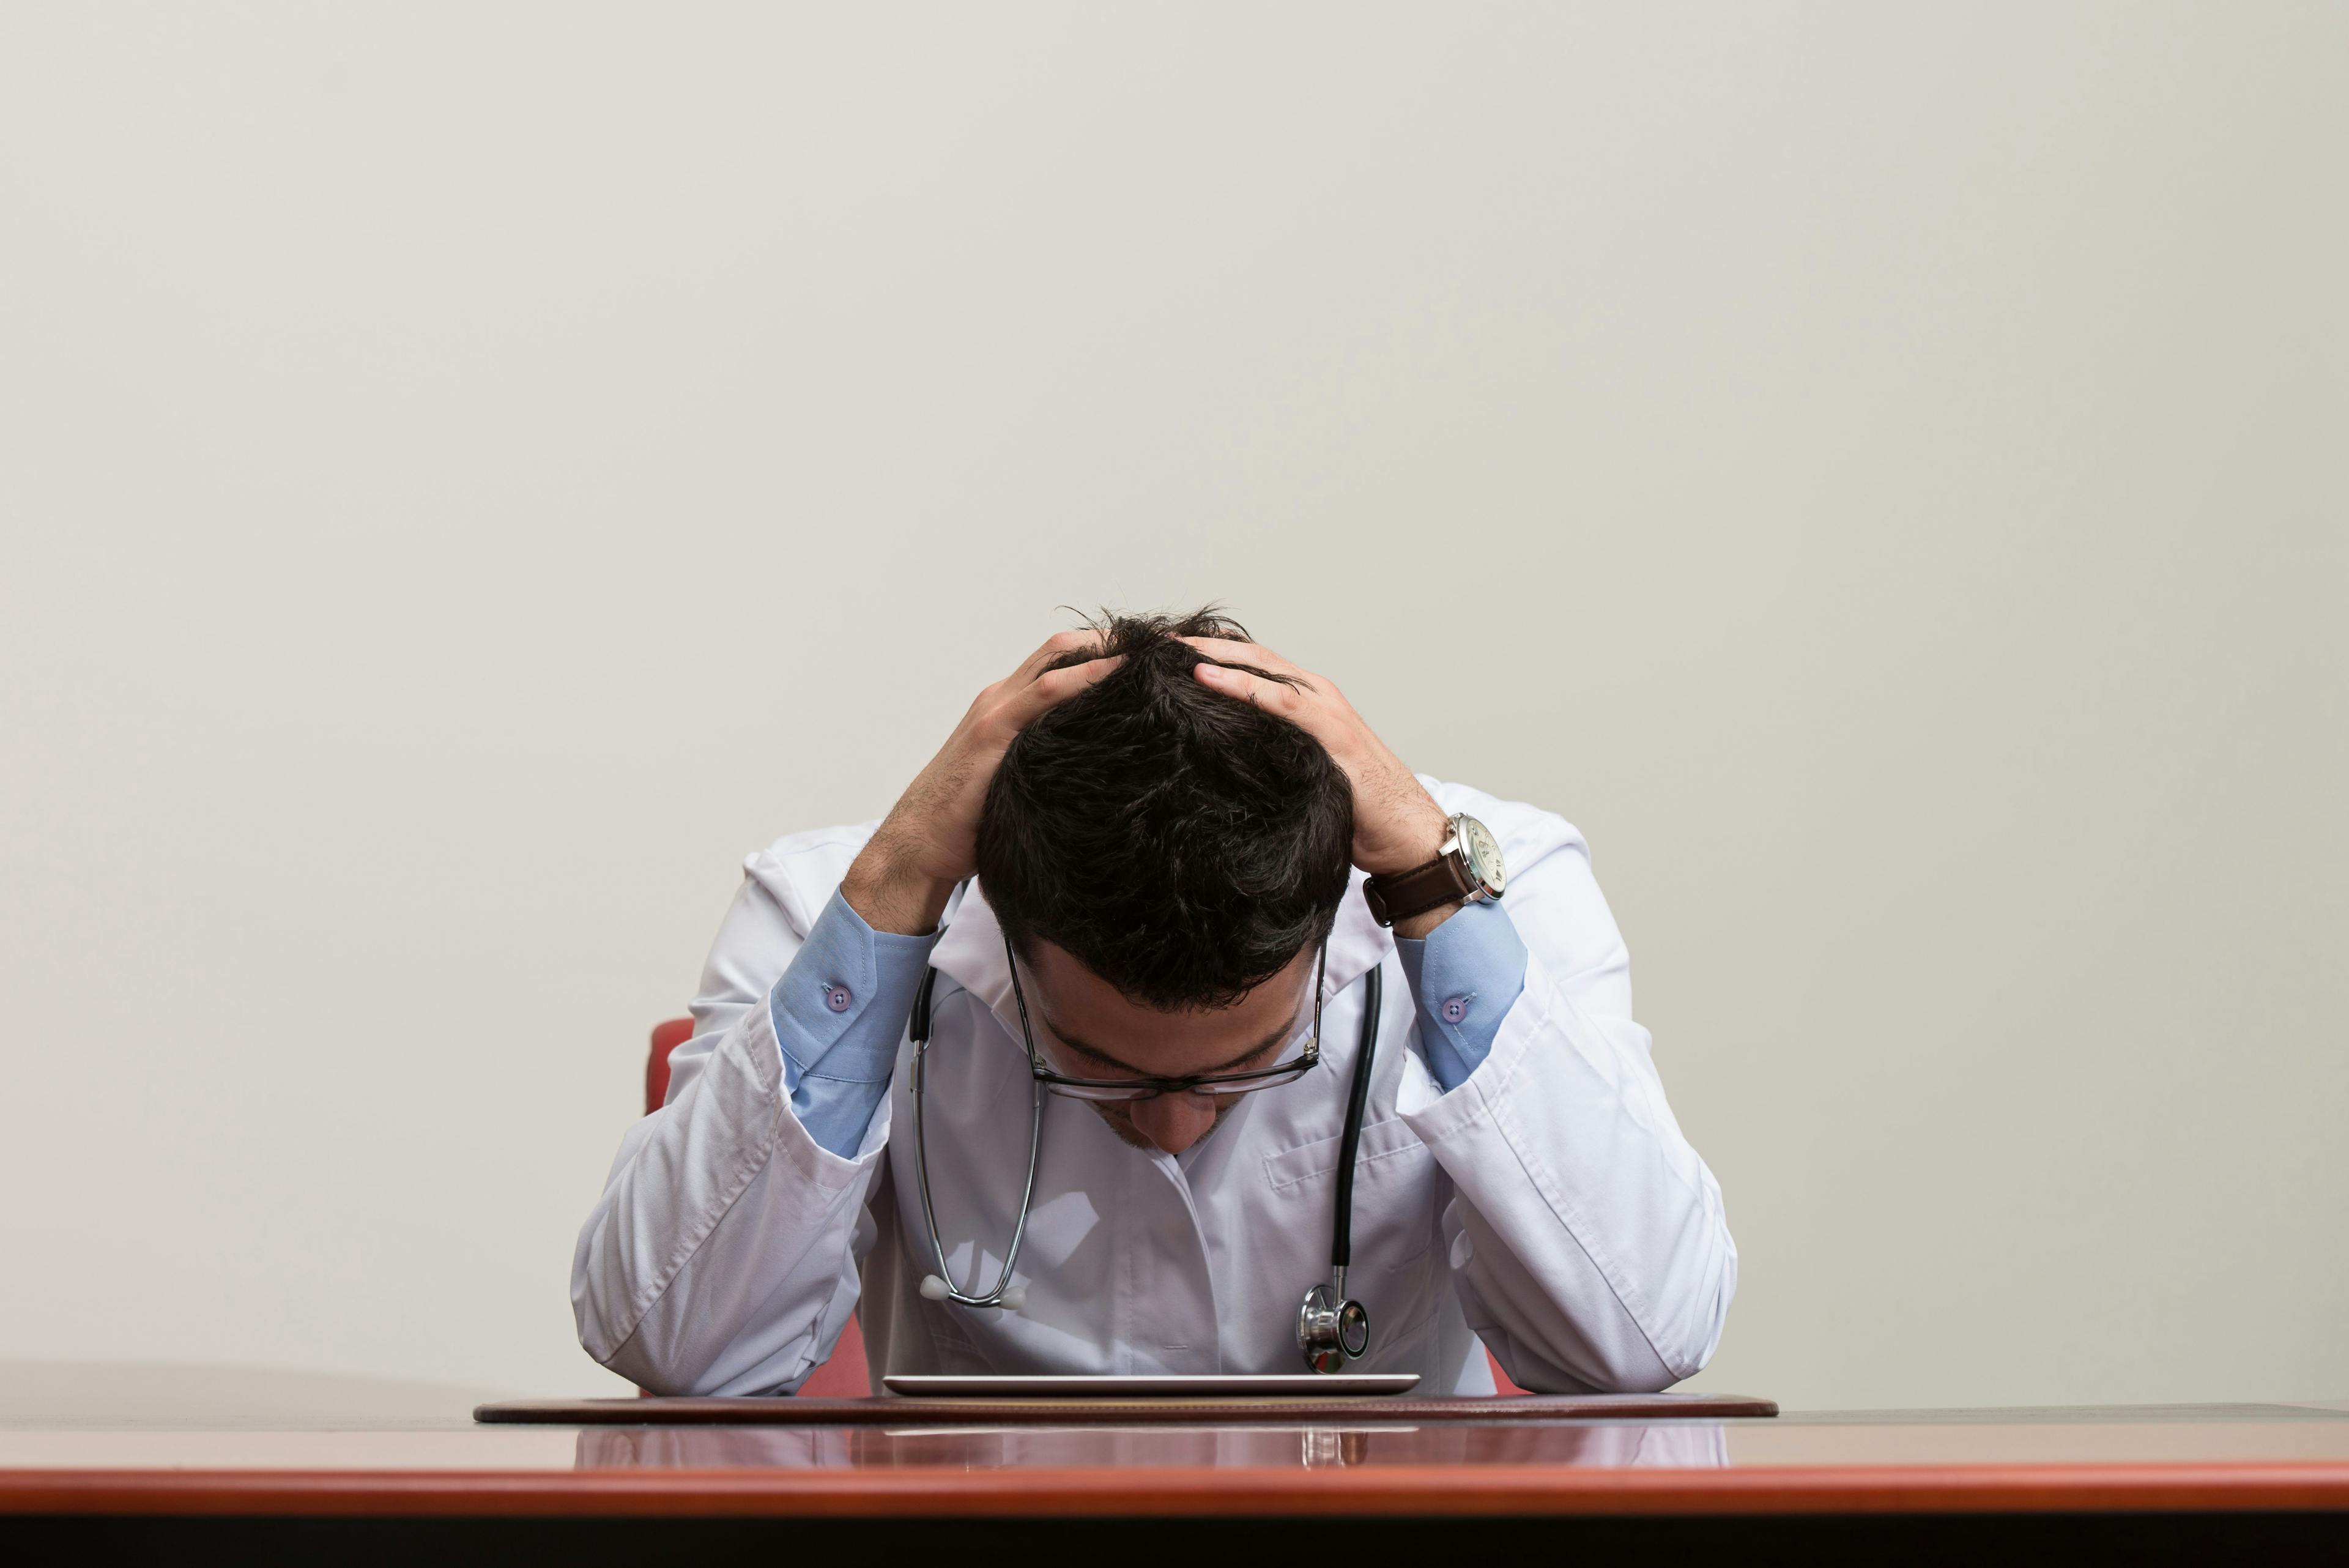 Study reveals that younger veterinary professionals have higher burnout rates